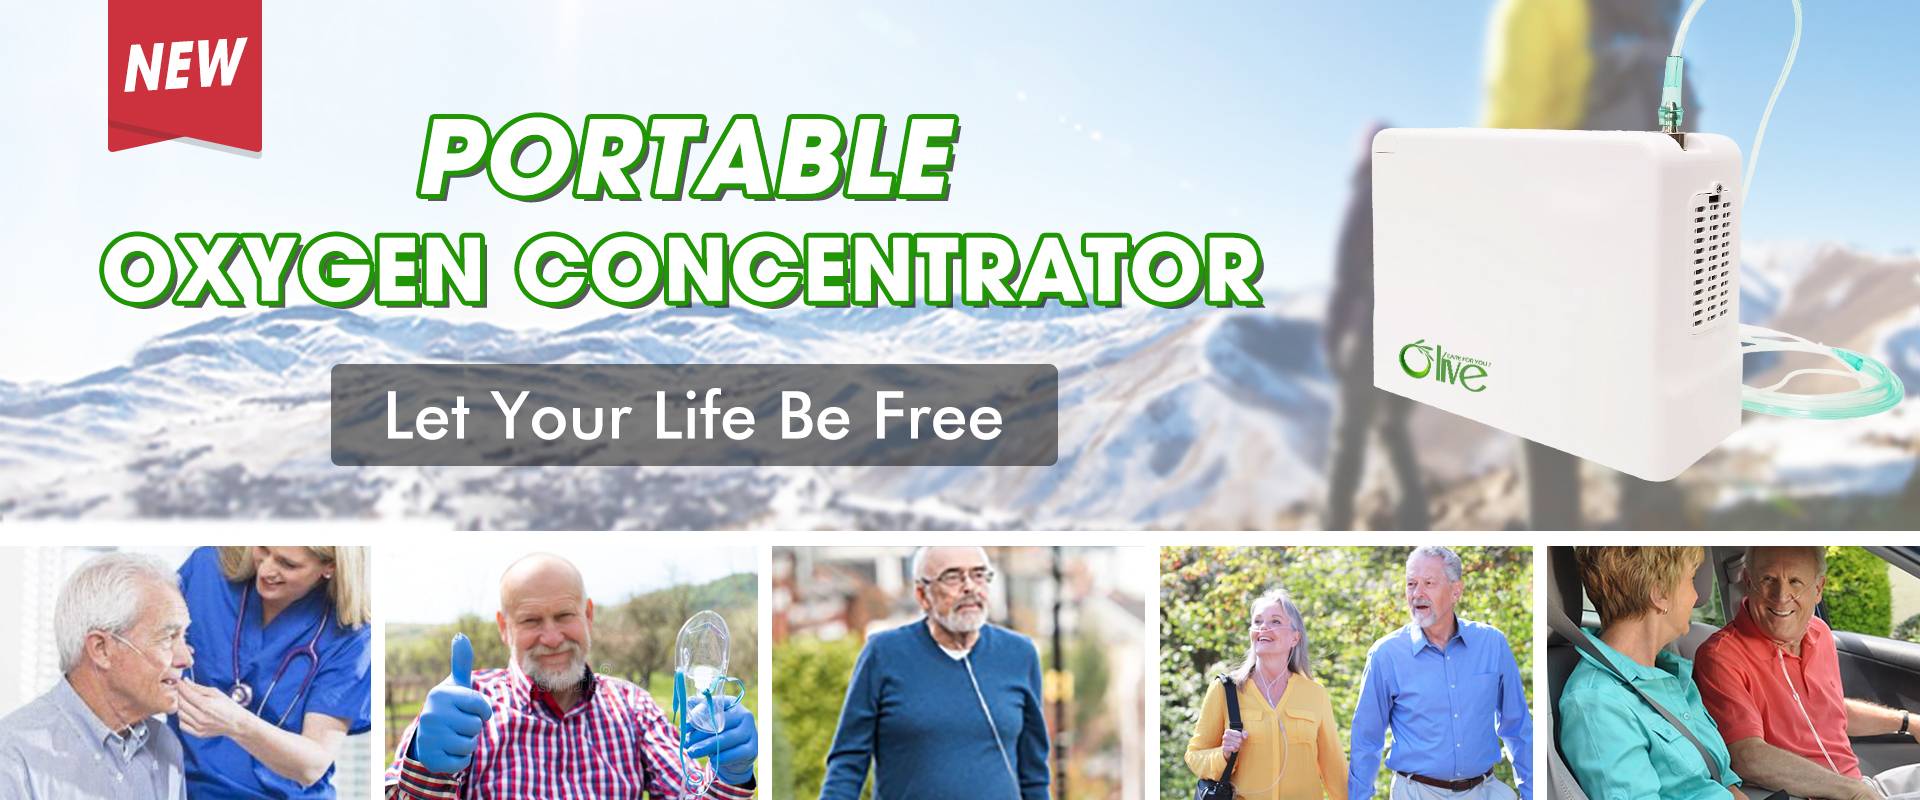 new portable oxygen concentrator